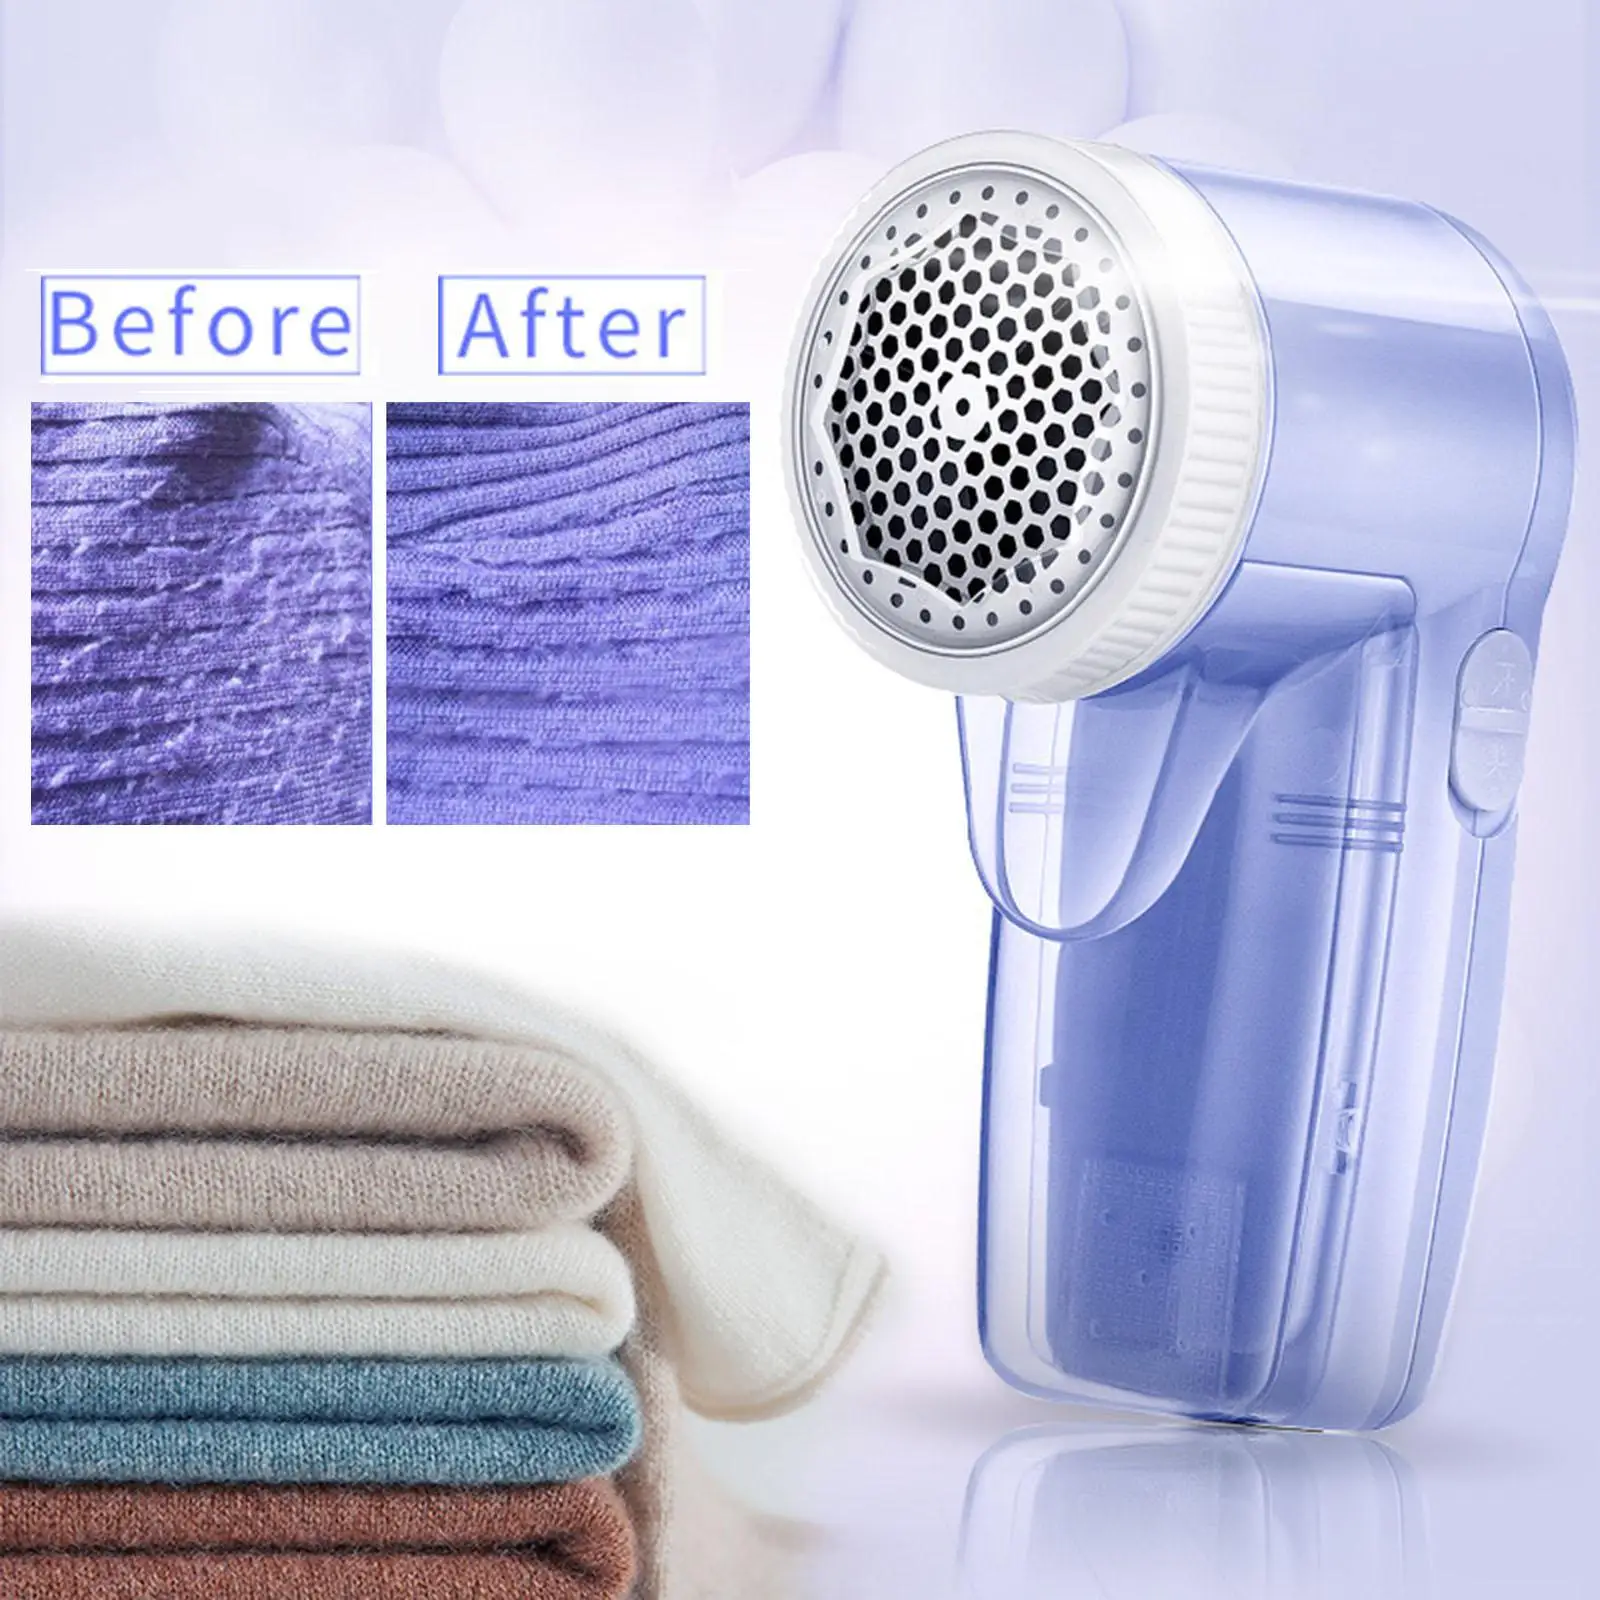 Lint Remover Removal Tool Sweater Shaver Removal Trimmer Shaver Defuzzer for Blanket Synthetic Fibers Bedding Cashmere Clothes